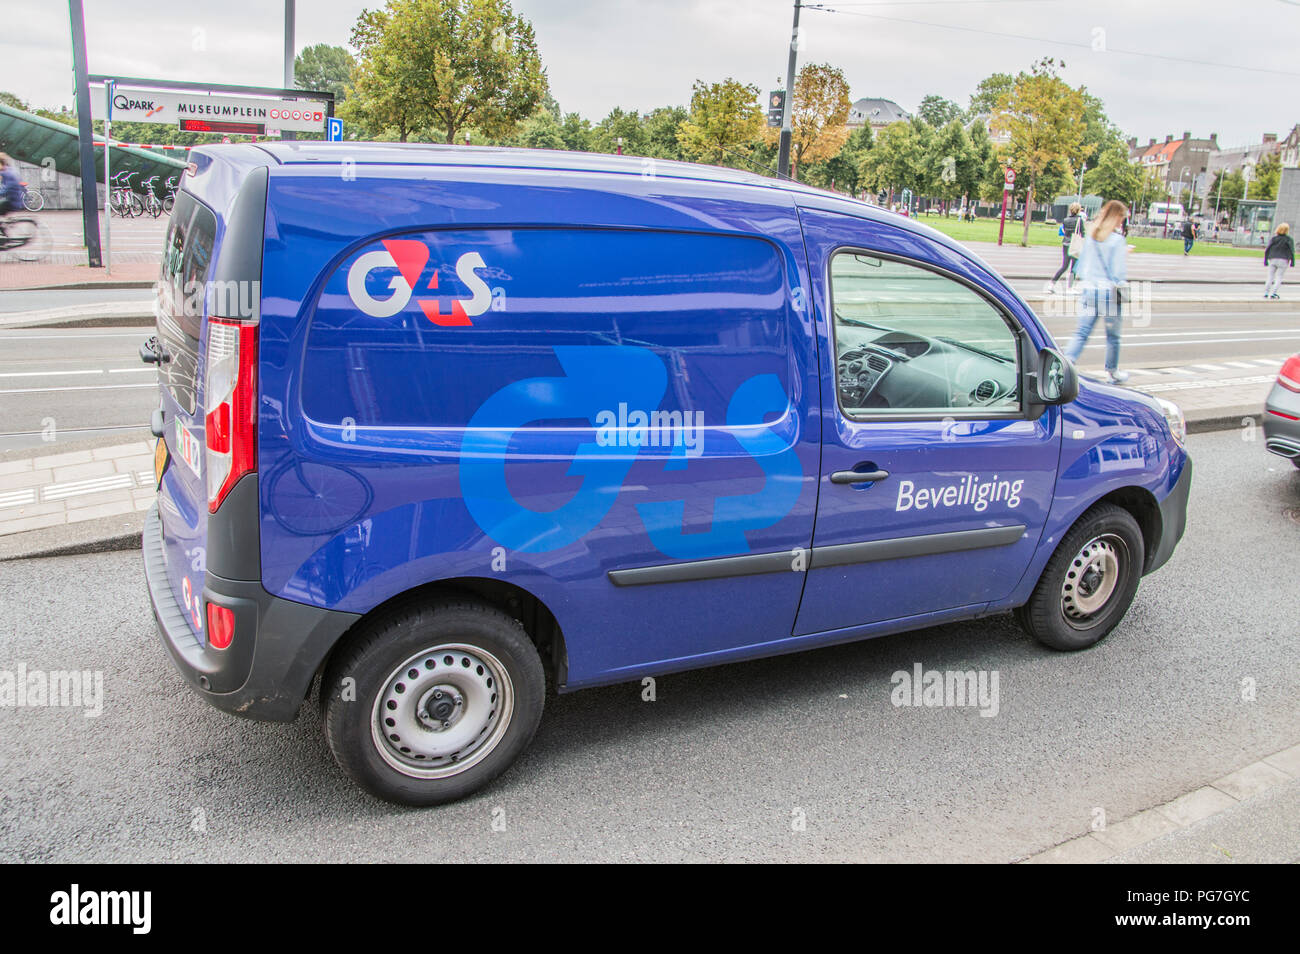 G4S Security Company Car At Amsterdam The Netherlands 2018 Stock Photo